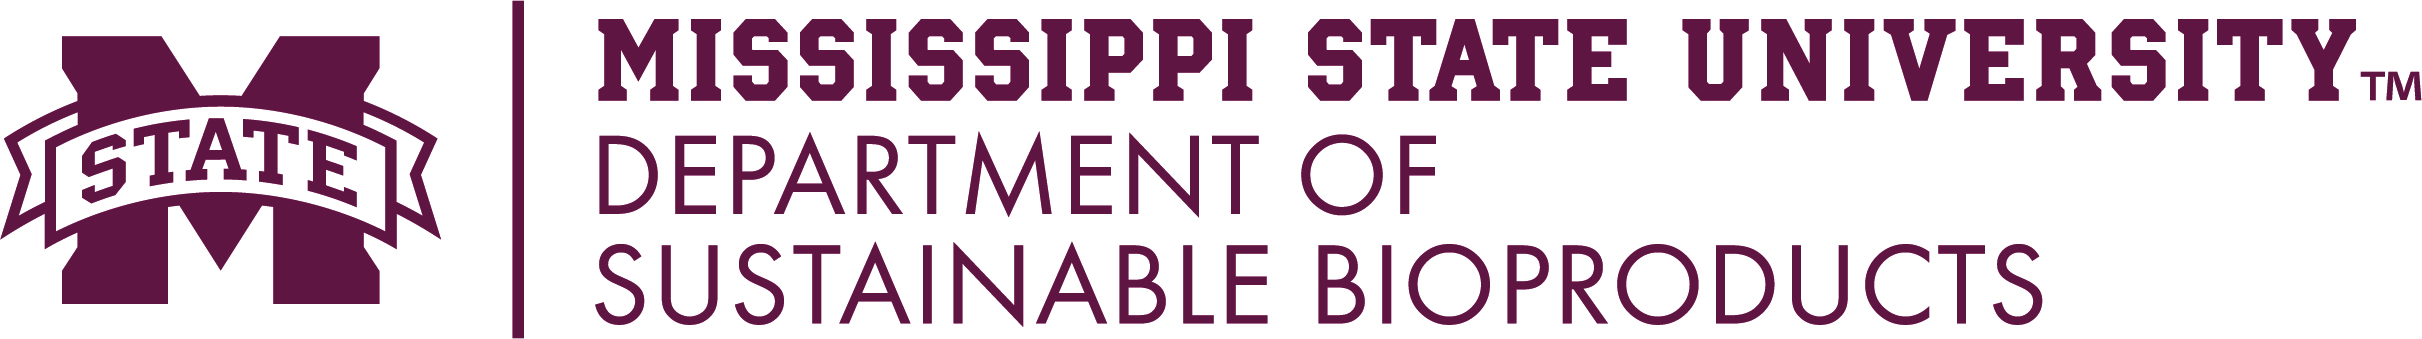 logo for mississippi state university department of sustainable bioproducts